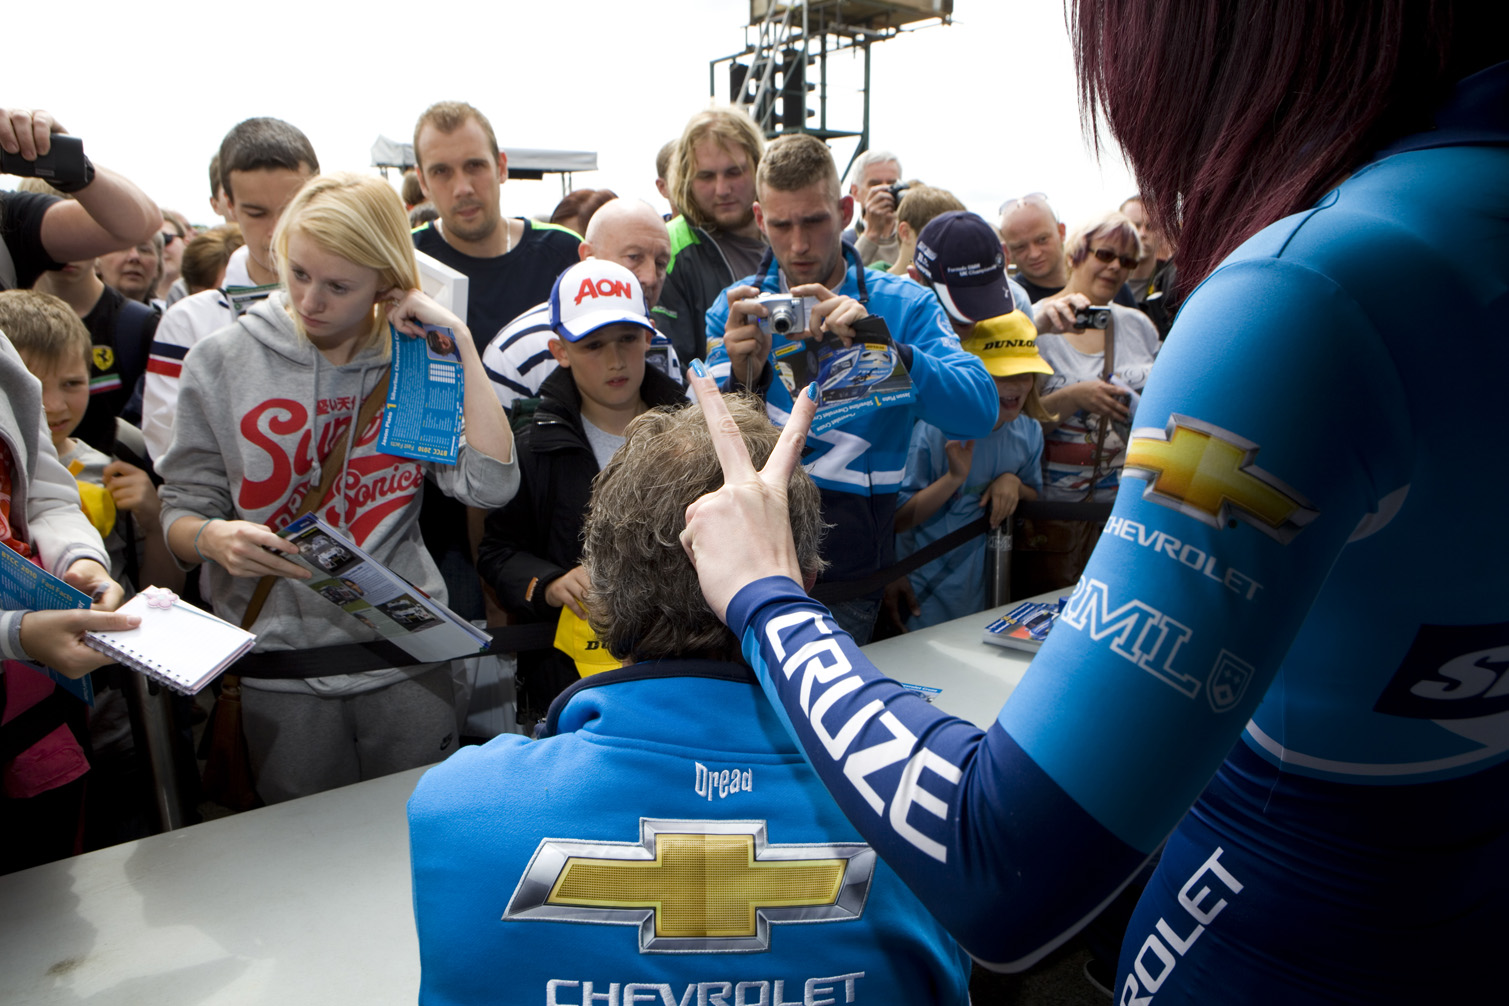 Signs autographs for fans at the Croft Circuit.